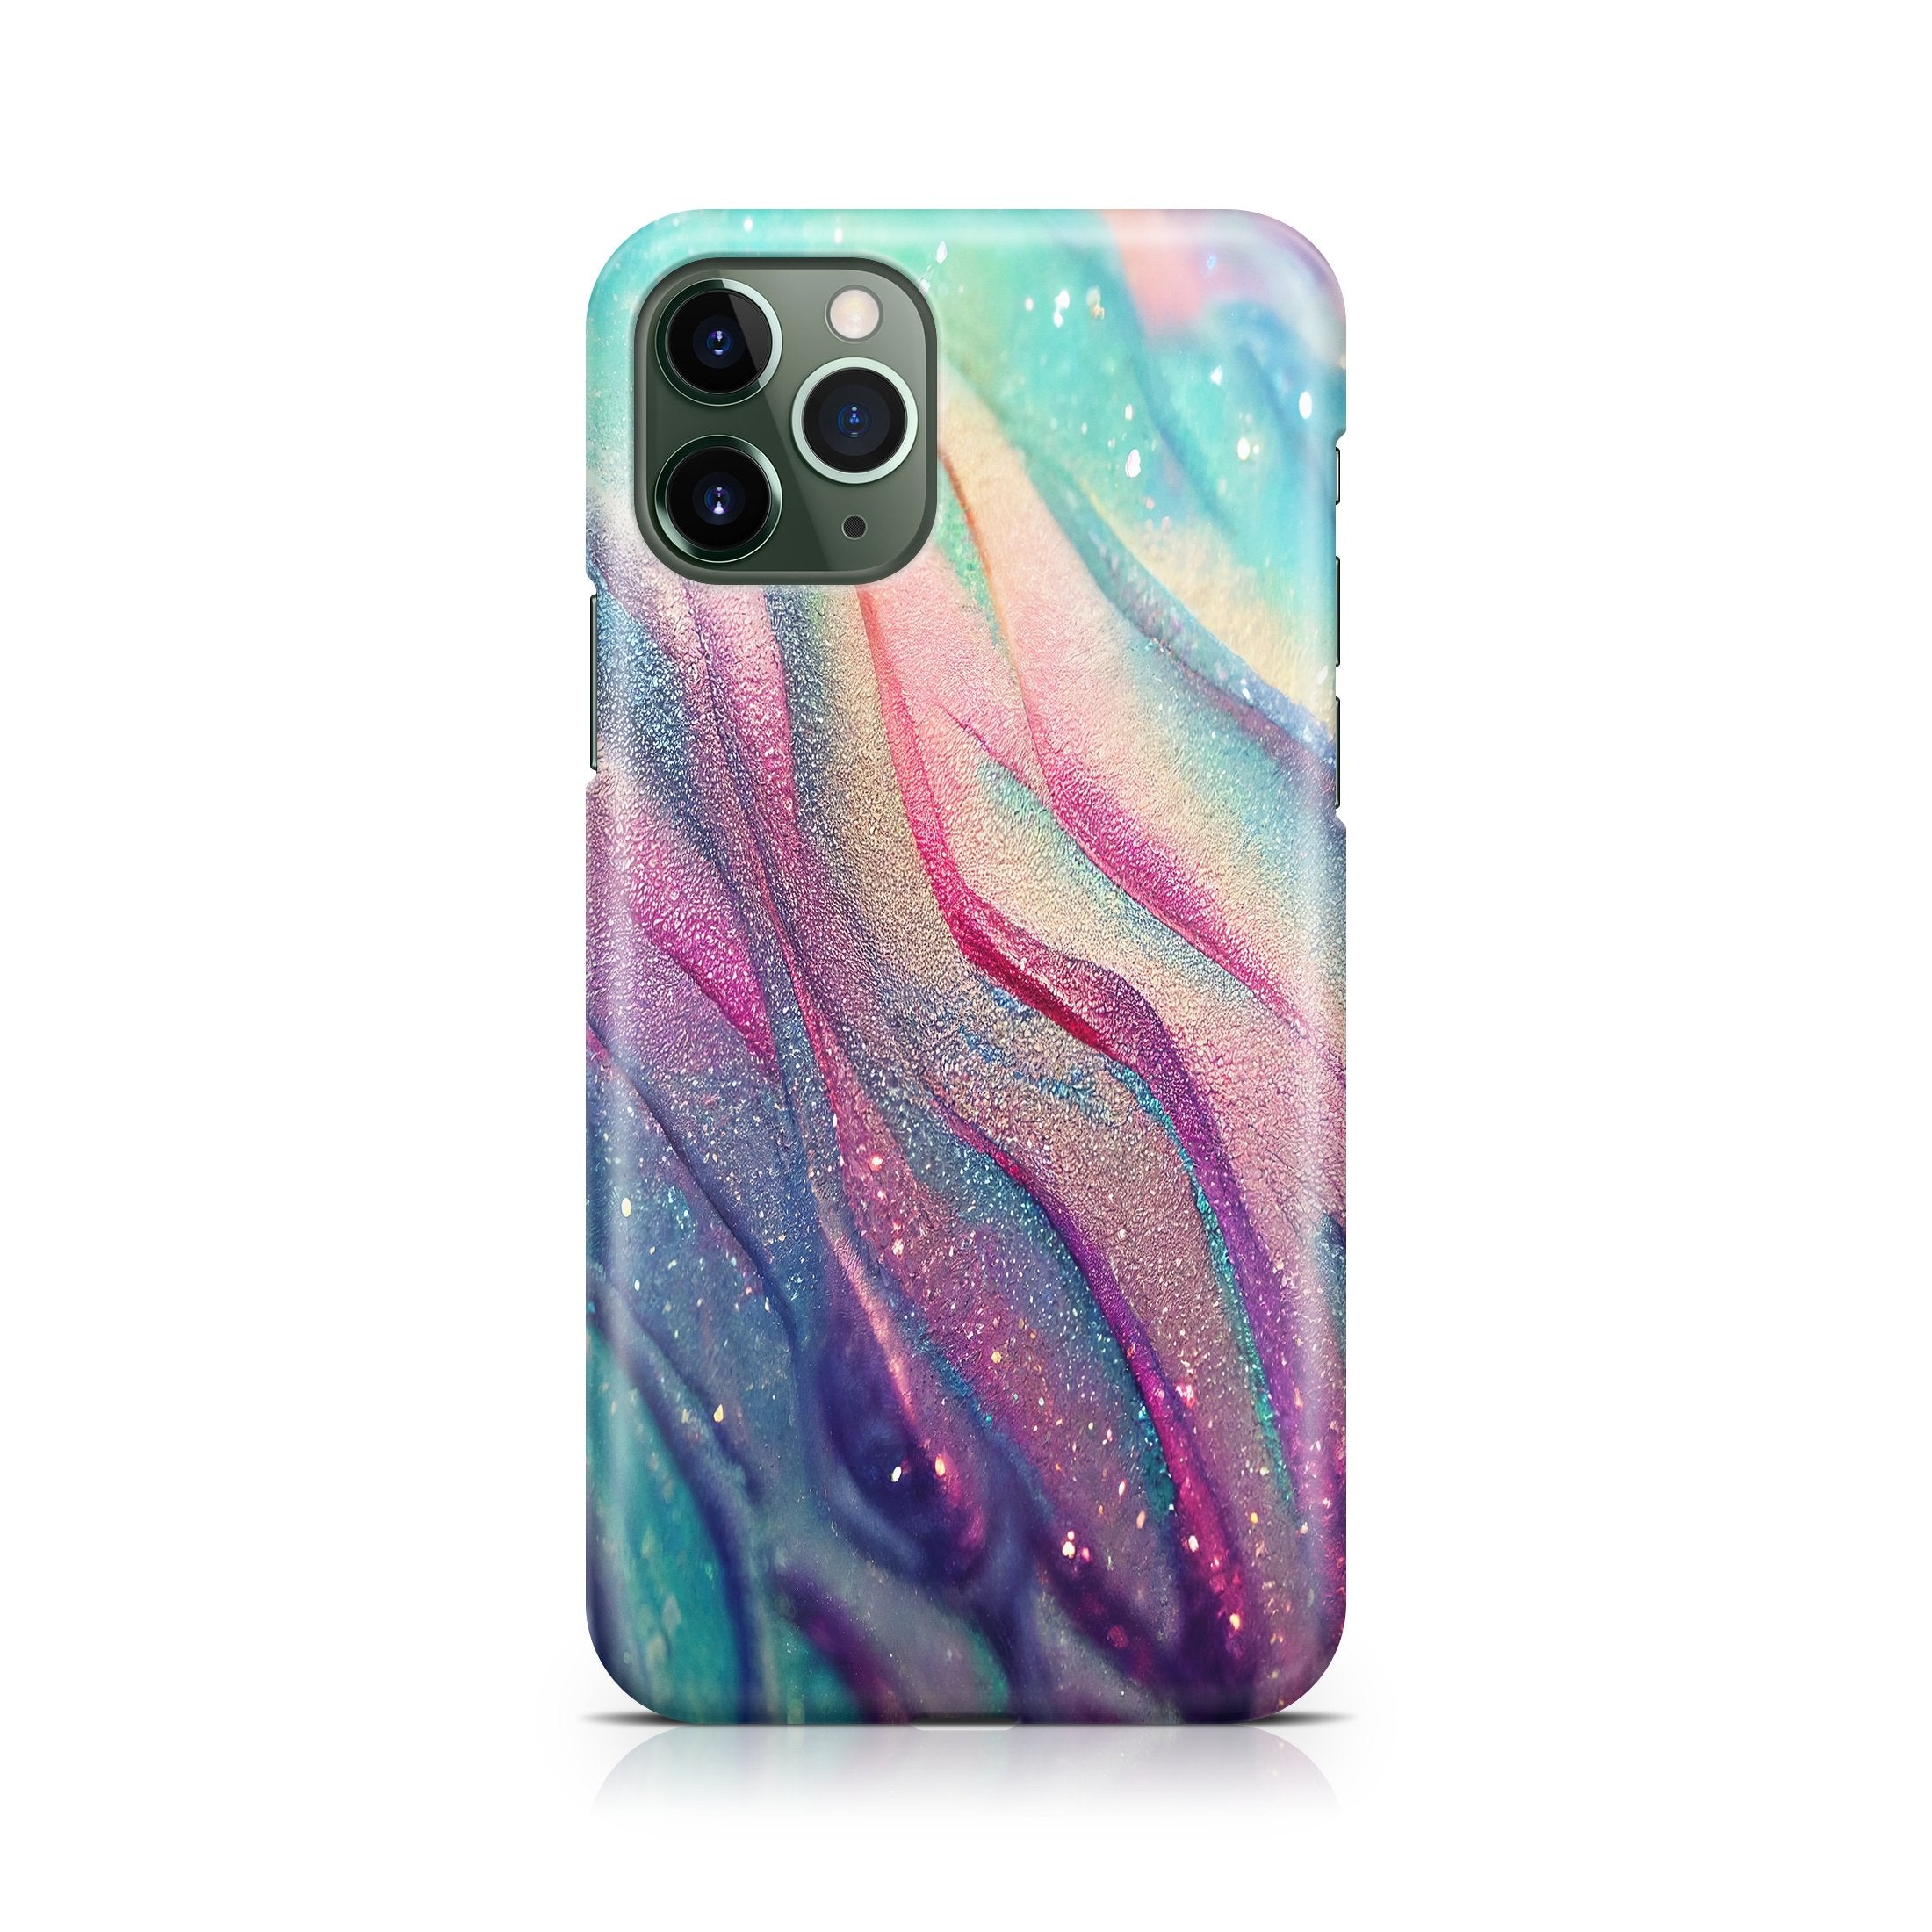 Tropical Sands - iPhone phone case designs by CaseSwagger